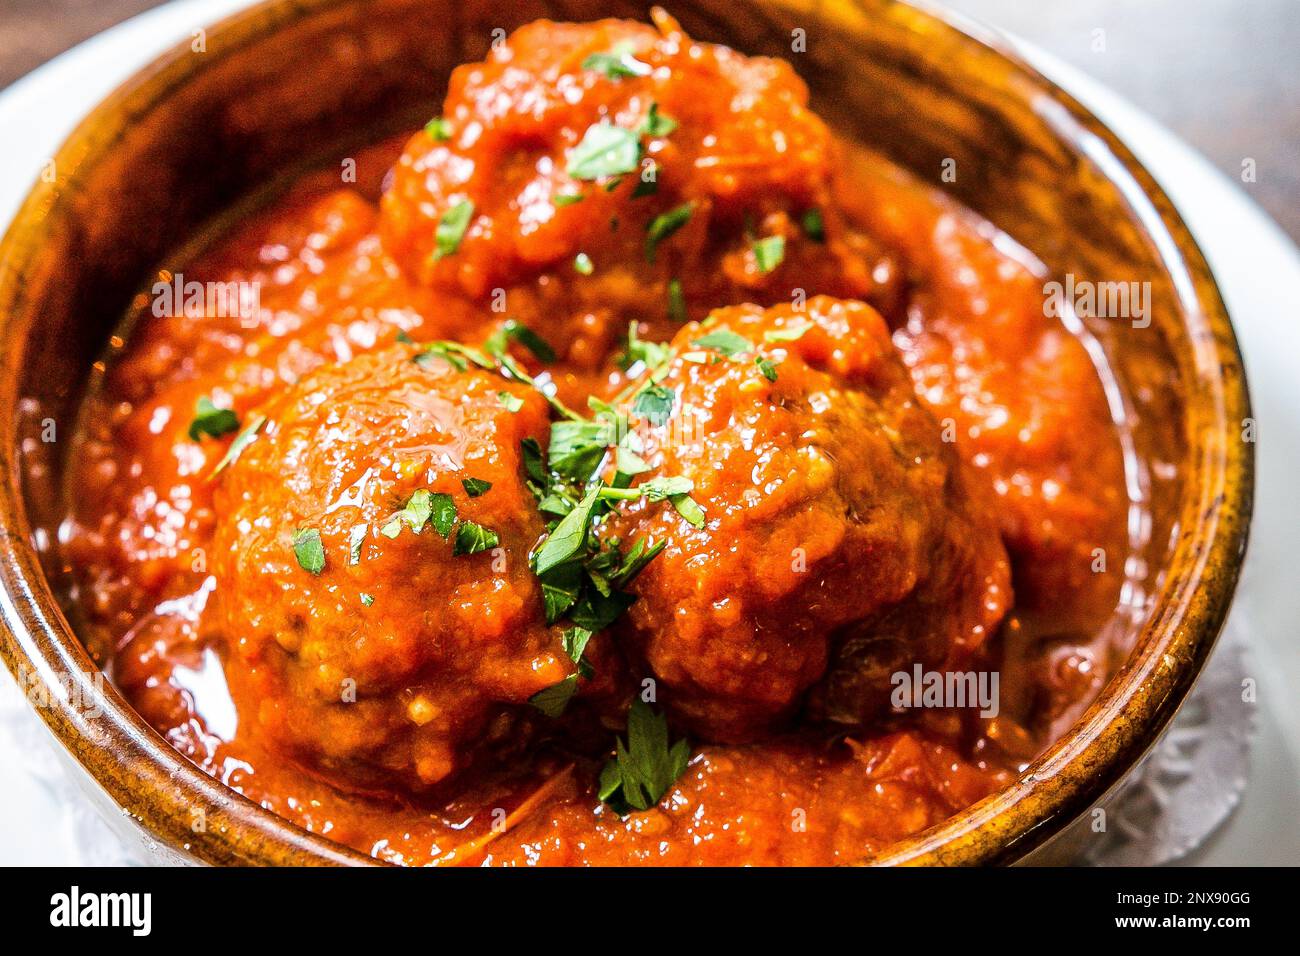 https://c8.alamy.com/comp/2NX90GG/spanish-cuisine-traditional-homemade-meatballs-in-rich-tomato-sauce-served-with-fresh-basil-tapas-in-a-rustic-terracotta-dish-2NX90GG.jpg